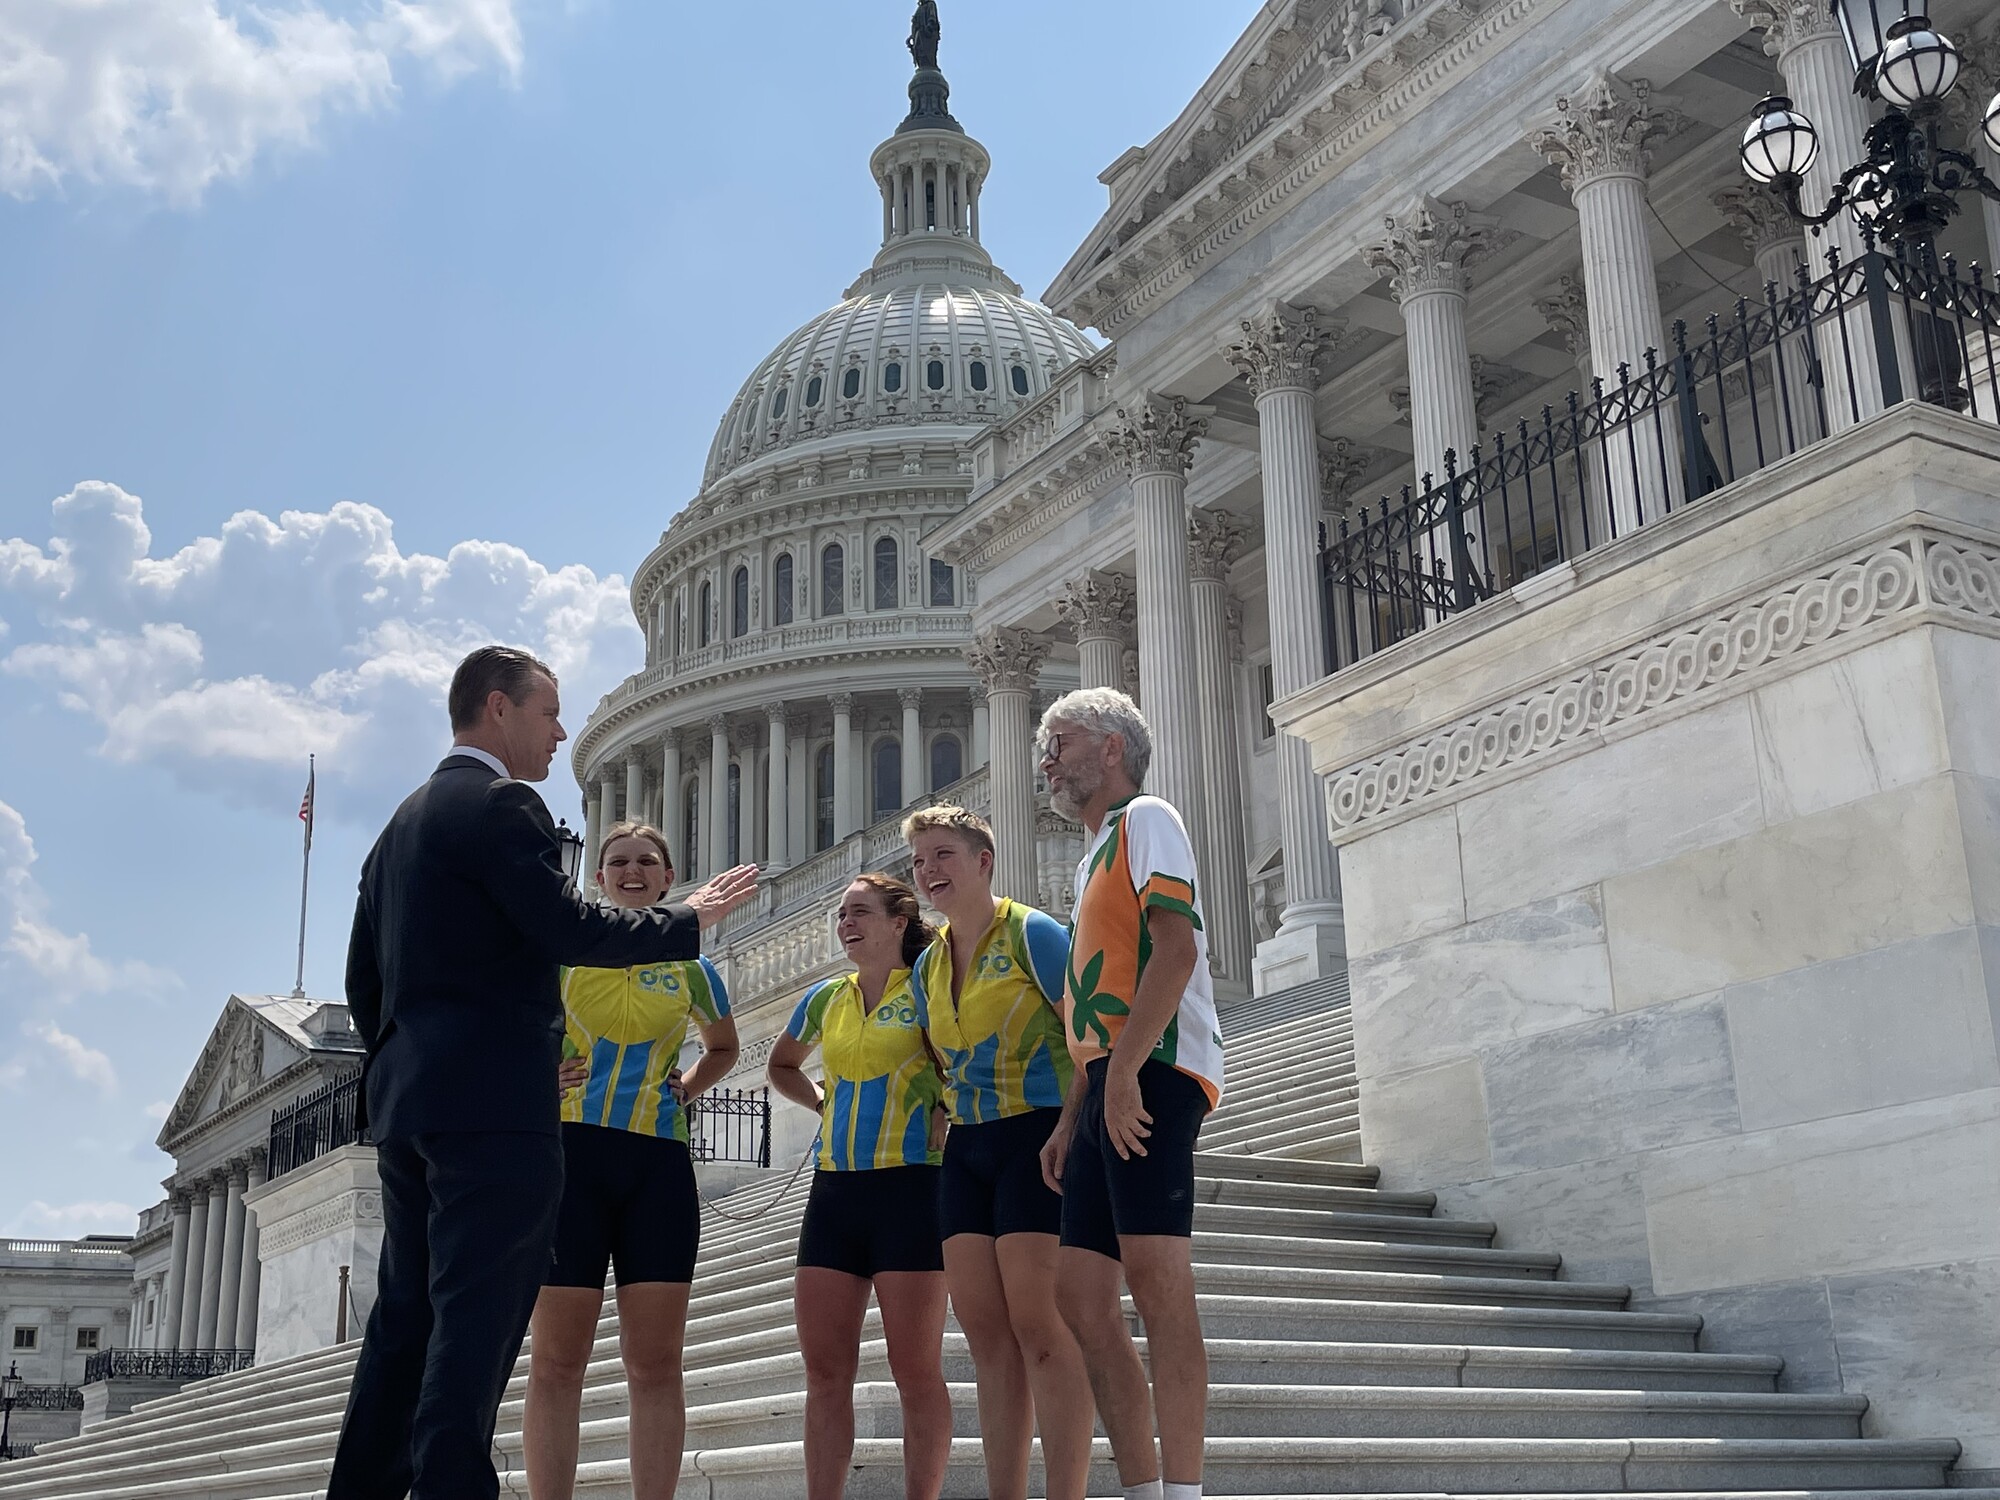 A group of cyclists standing in front of a US government building speaking to a government official